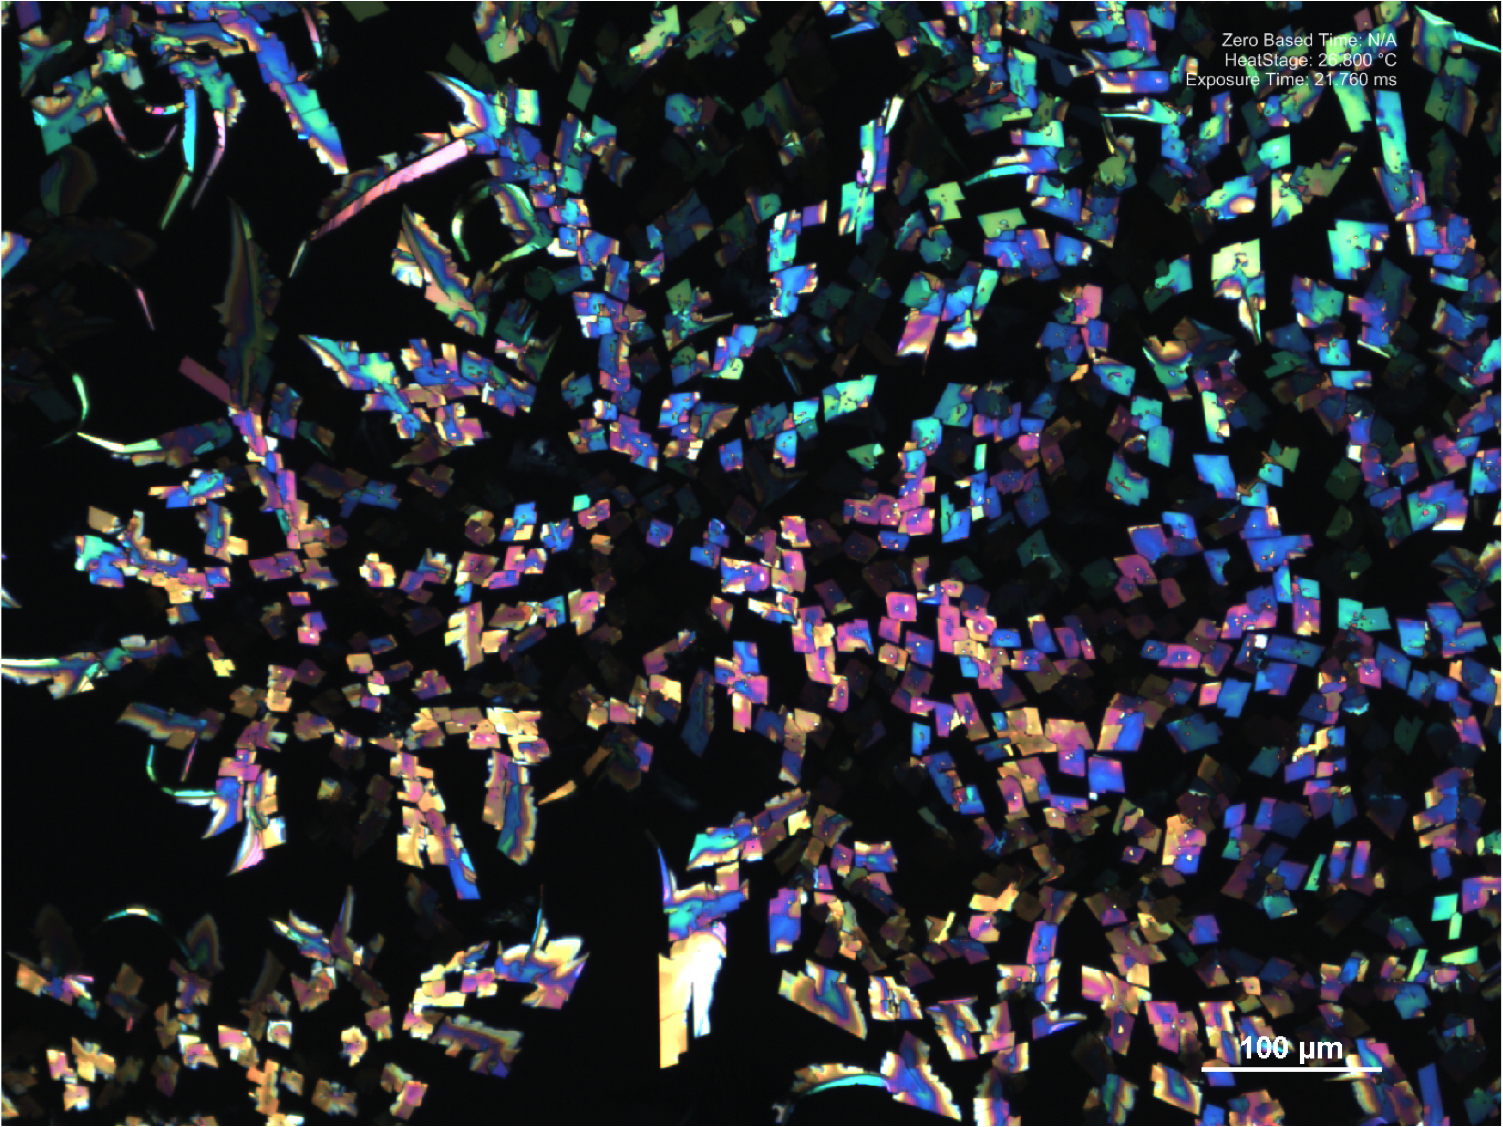 Crystal Confetti by Rebecca Boehning(2016), Second place in 2016 Image of Research Competition